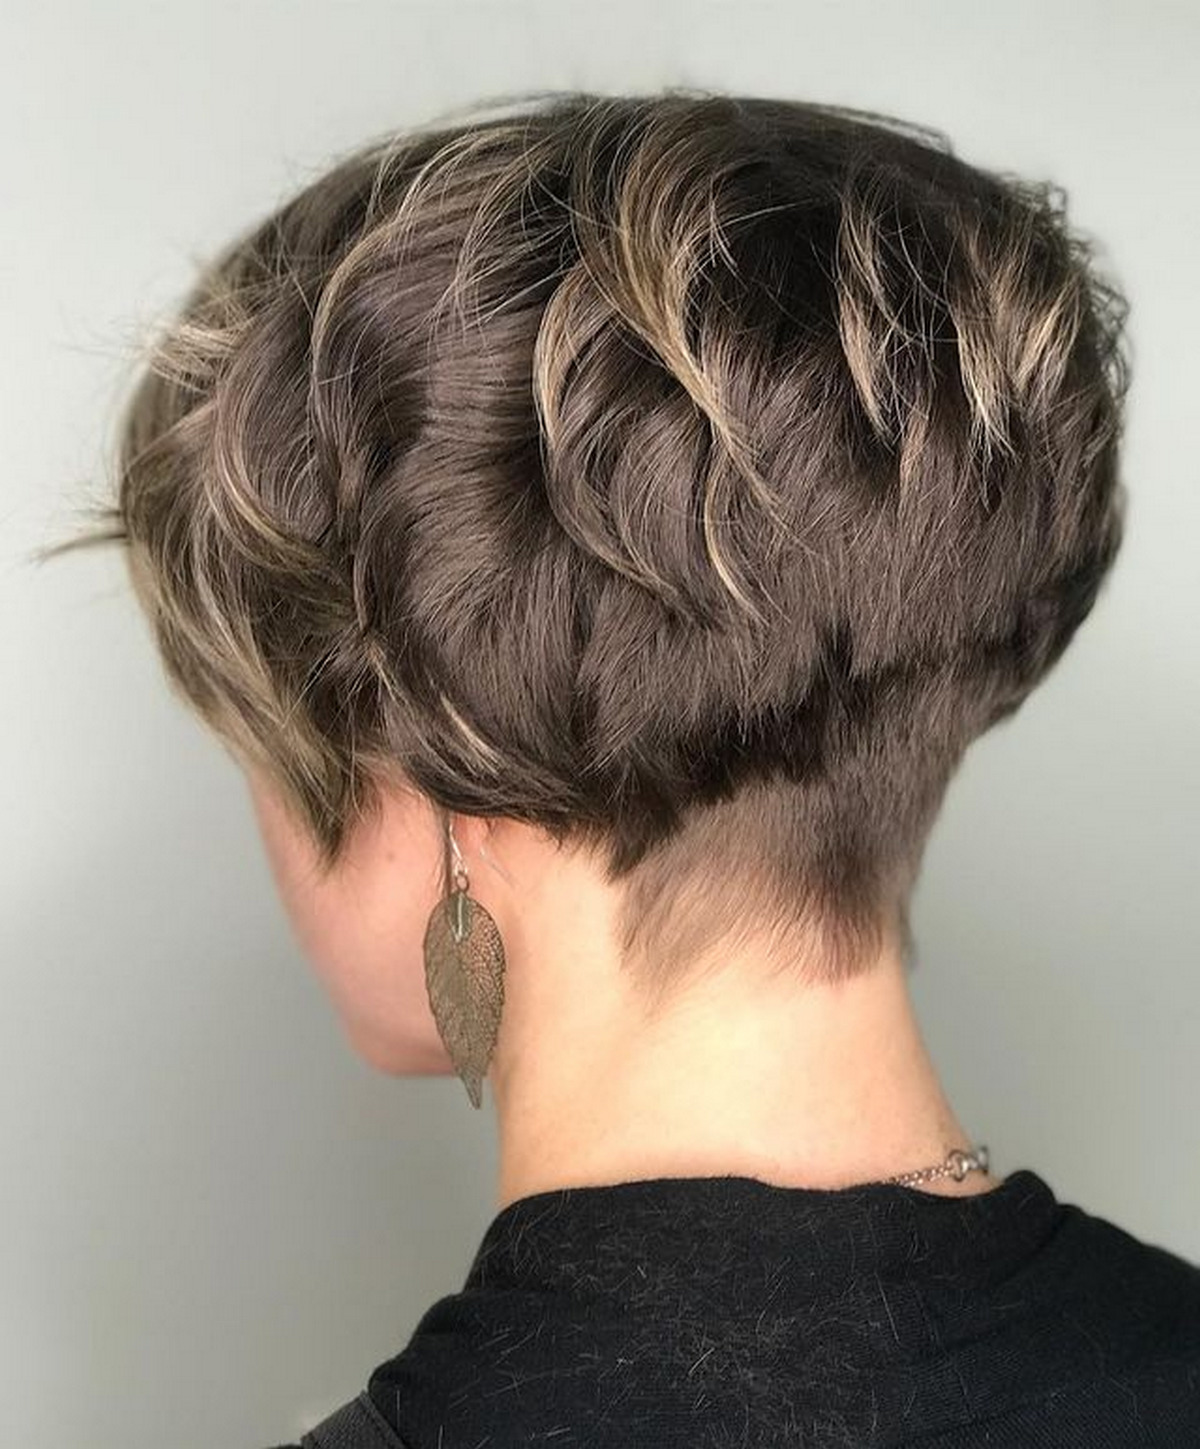 Stacked Pixie Cut